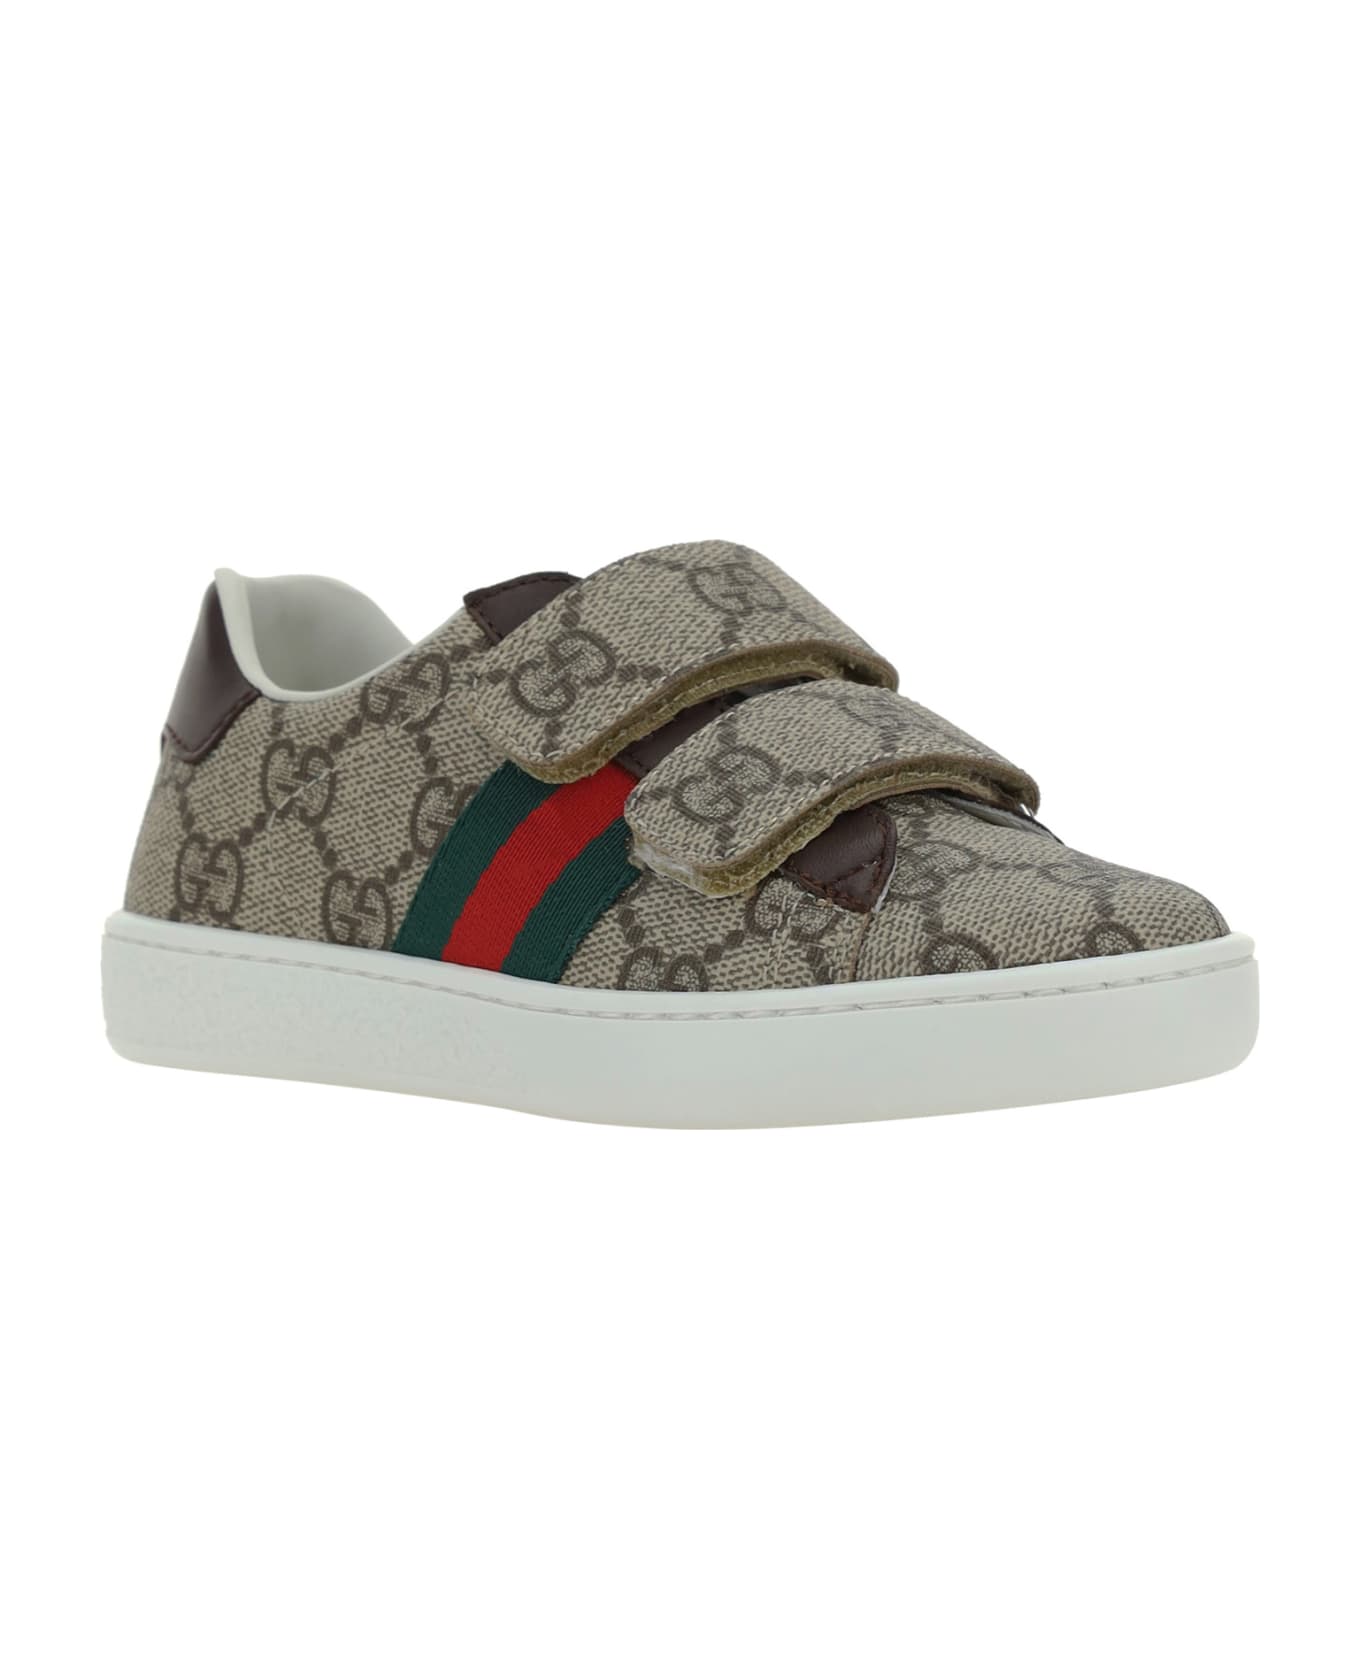 Gucci Sneakers For Boy シューズ